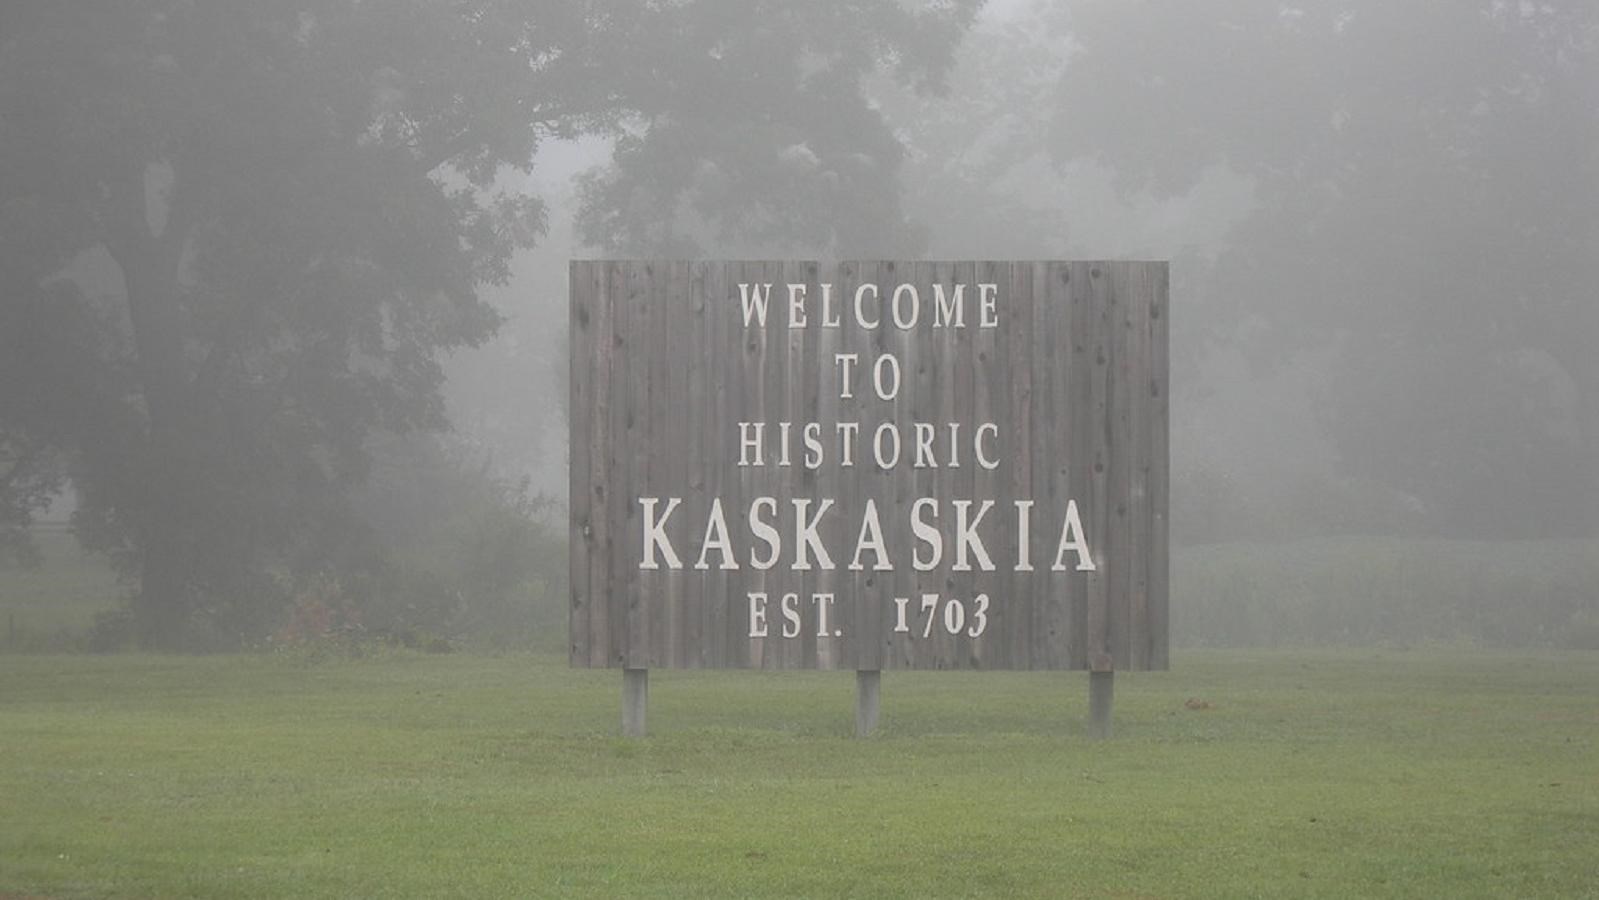 On a foggy morning, a wooden sign in the middle of the picture reads “Welcome to Histor